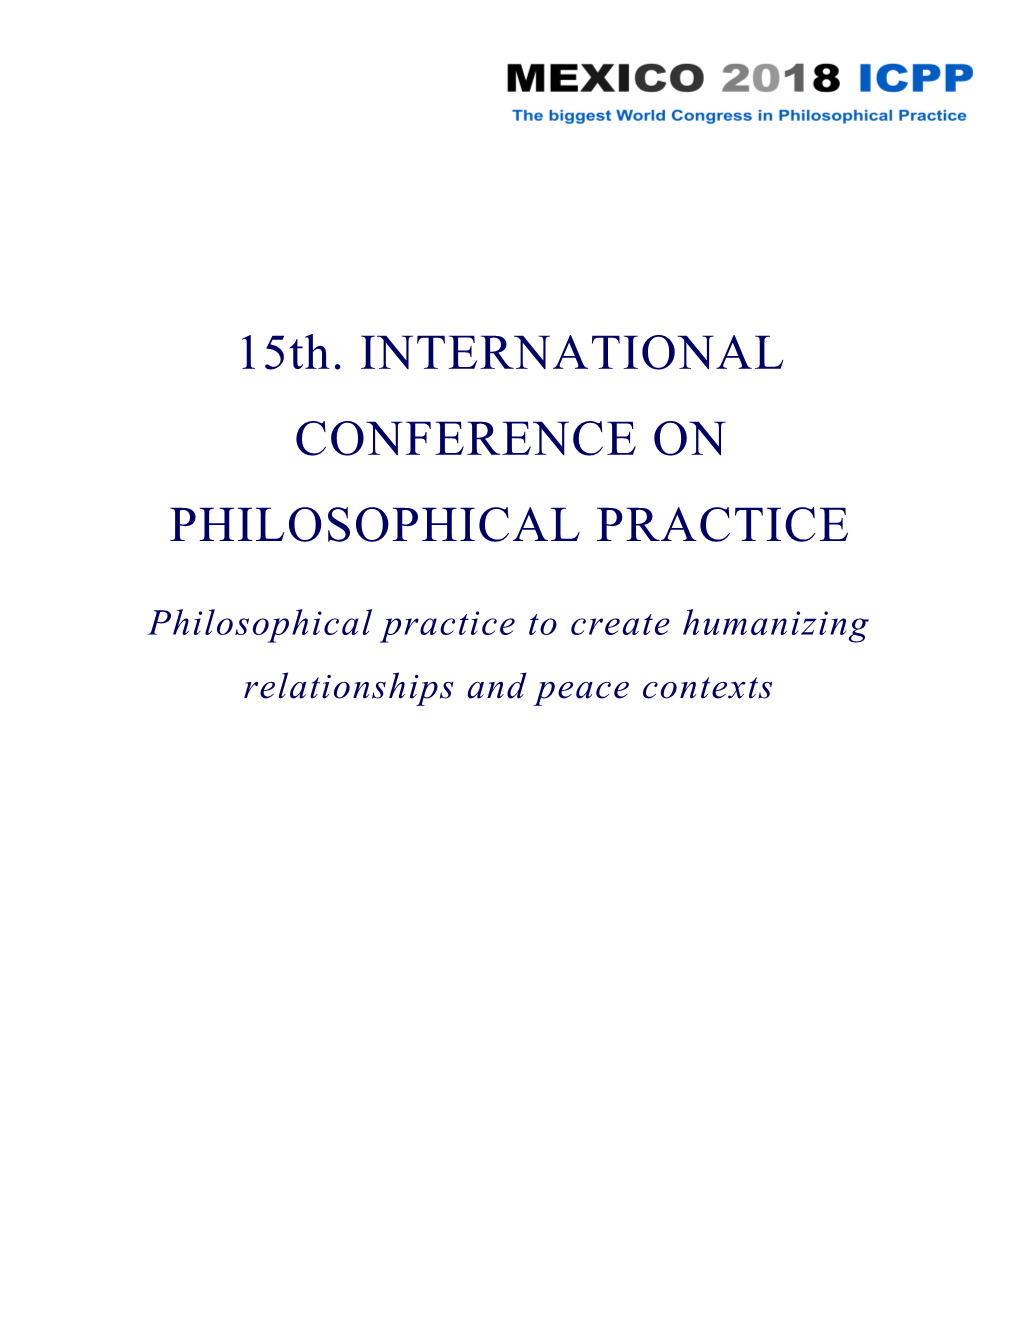 Philosophical Practice to Create Humanizing Relationships and Peace Contexts